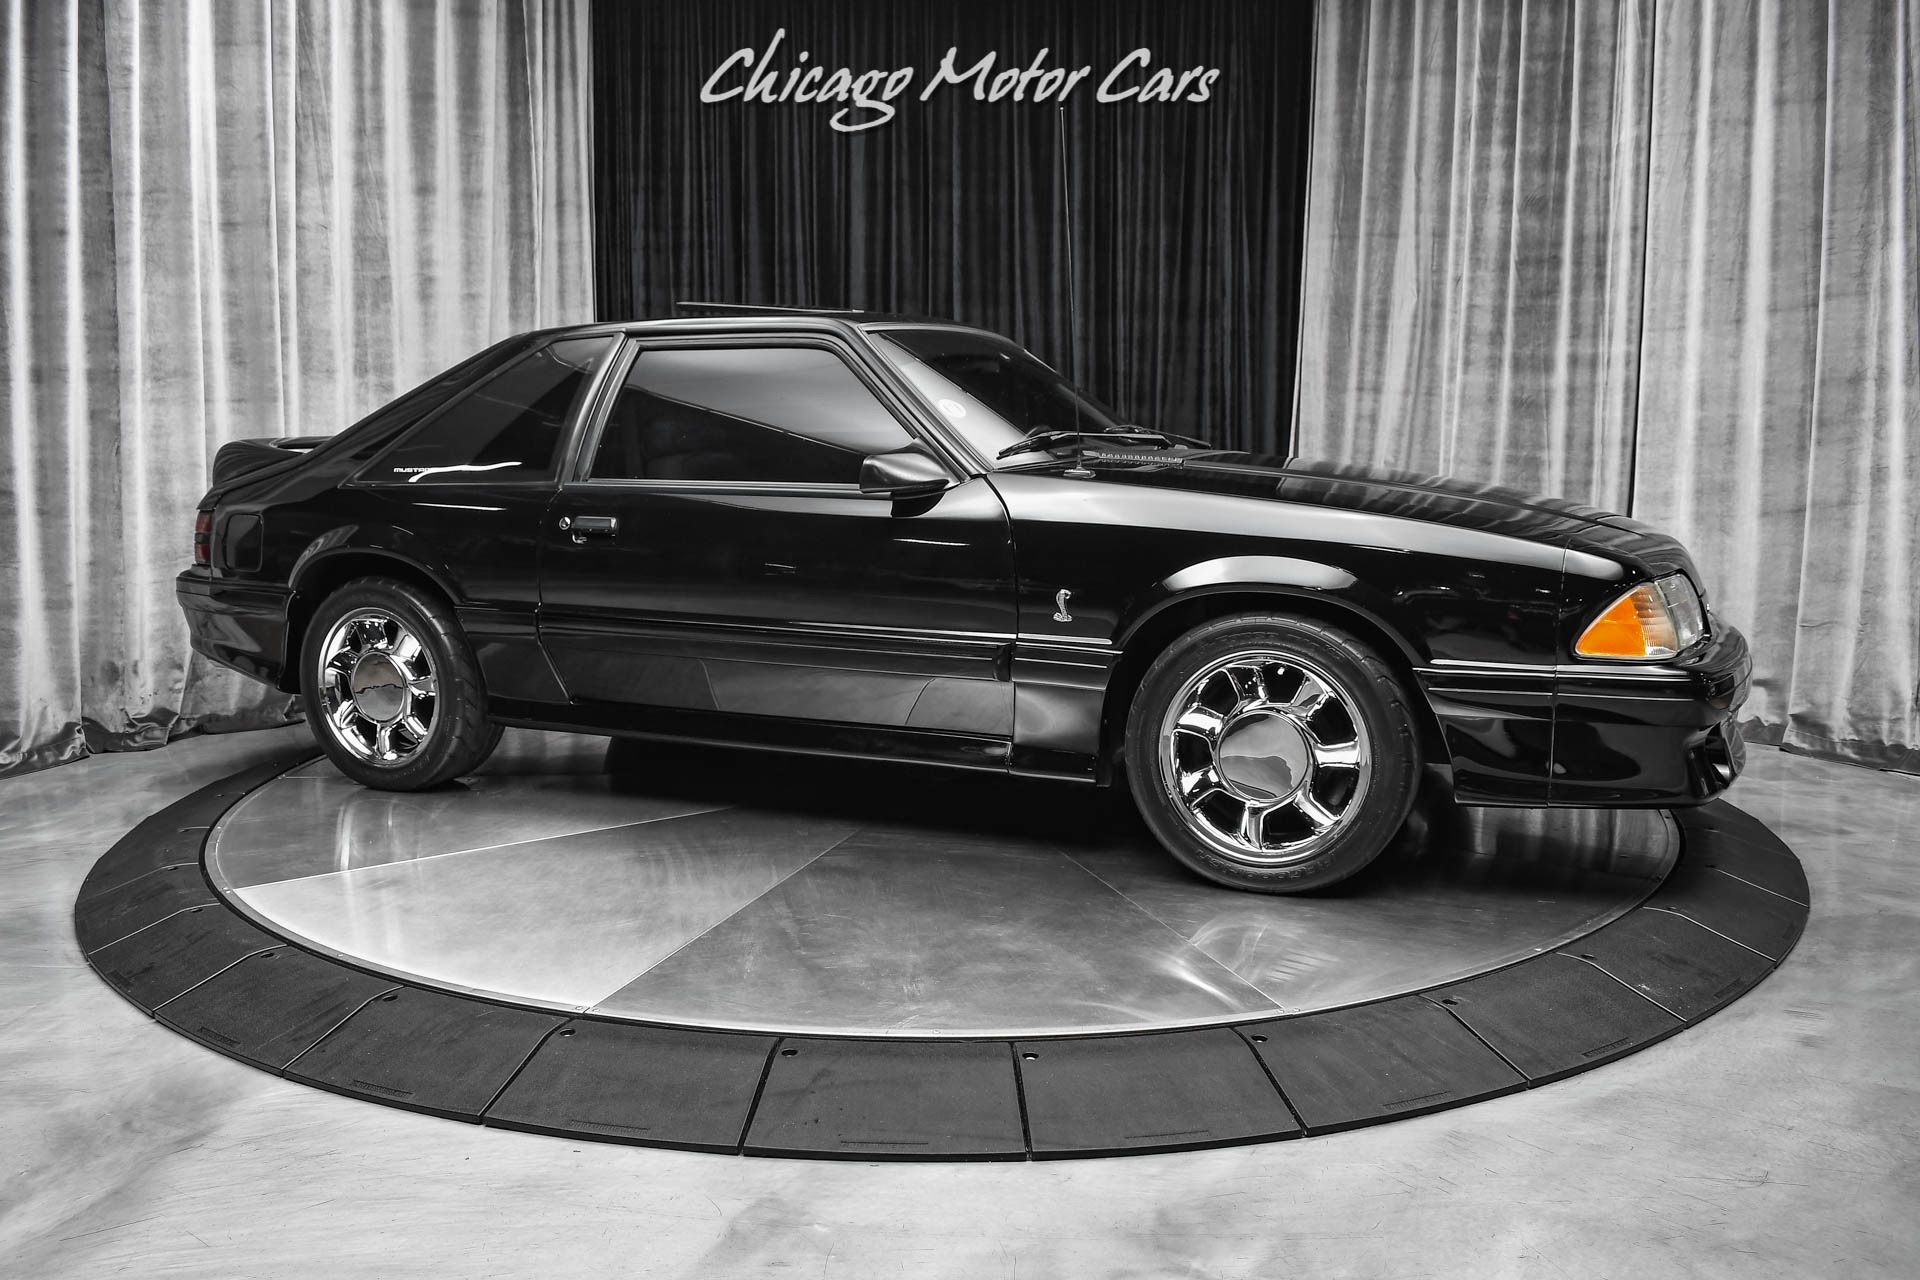 Used-1993-Ford-Mustang-Cobra-SVT-Coupe-Only-58k-Miles